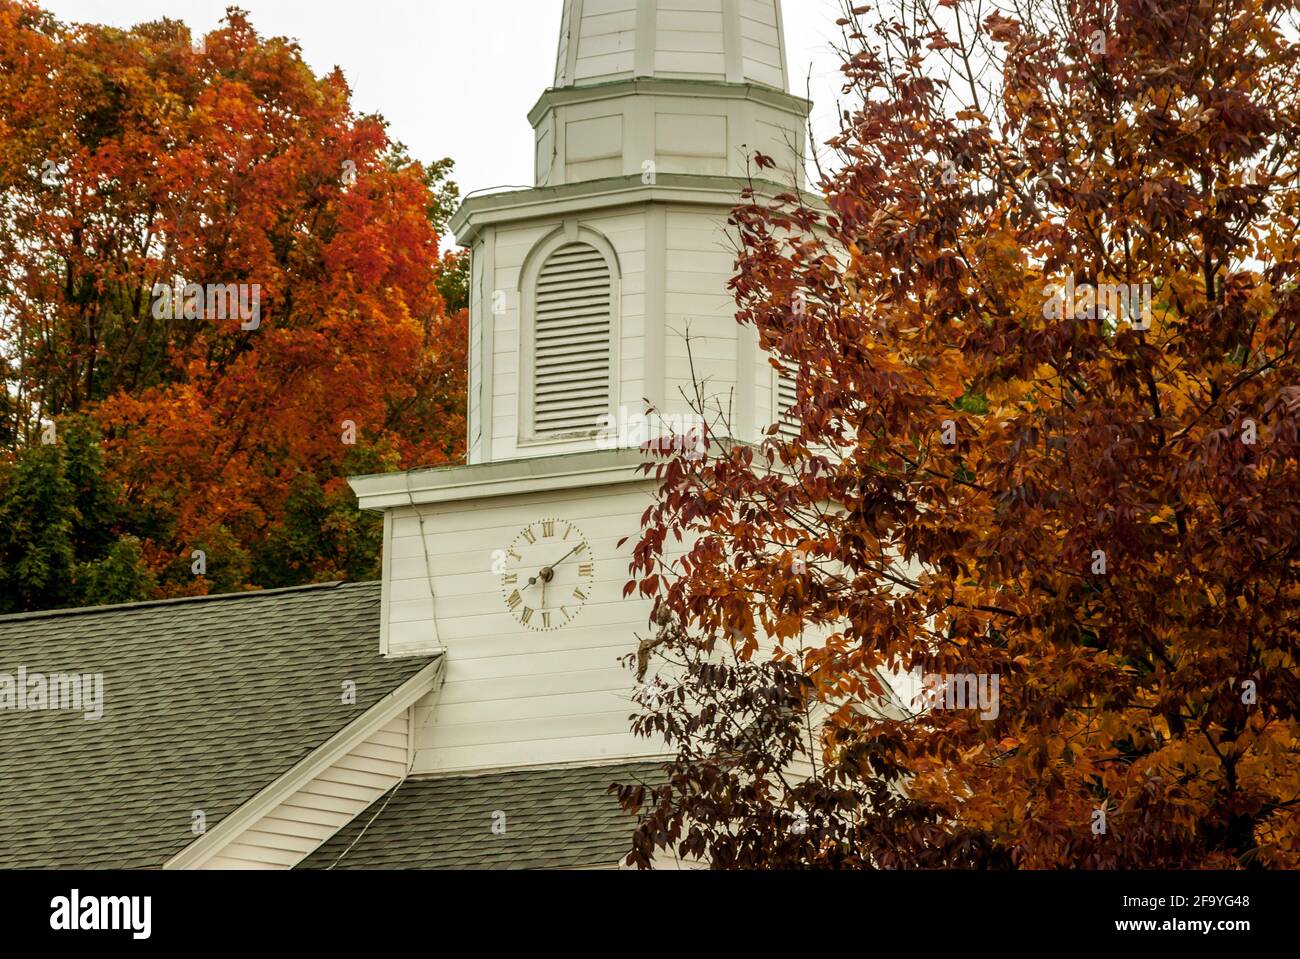 The white, wooden clock tower of Canterbury United Community Church, New Hampshire, USA amongst red foliage in autumn / fall Stock Photo